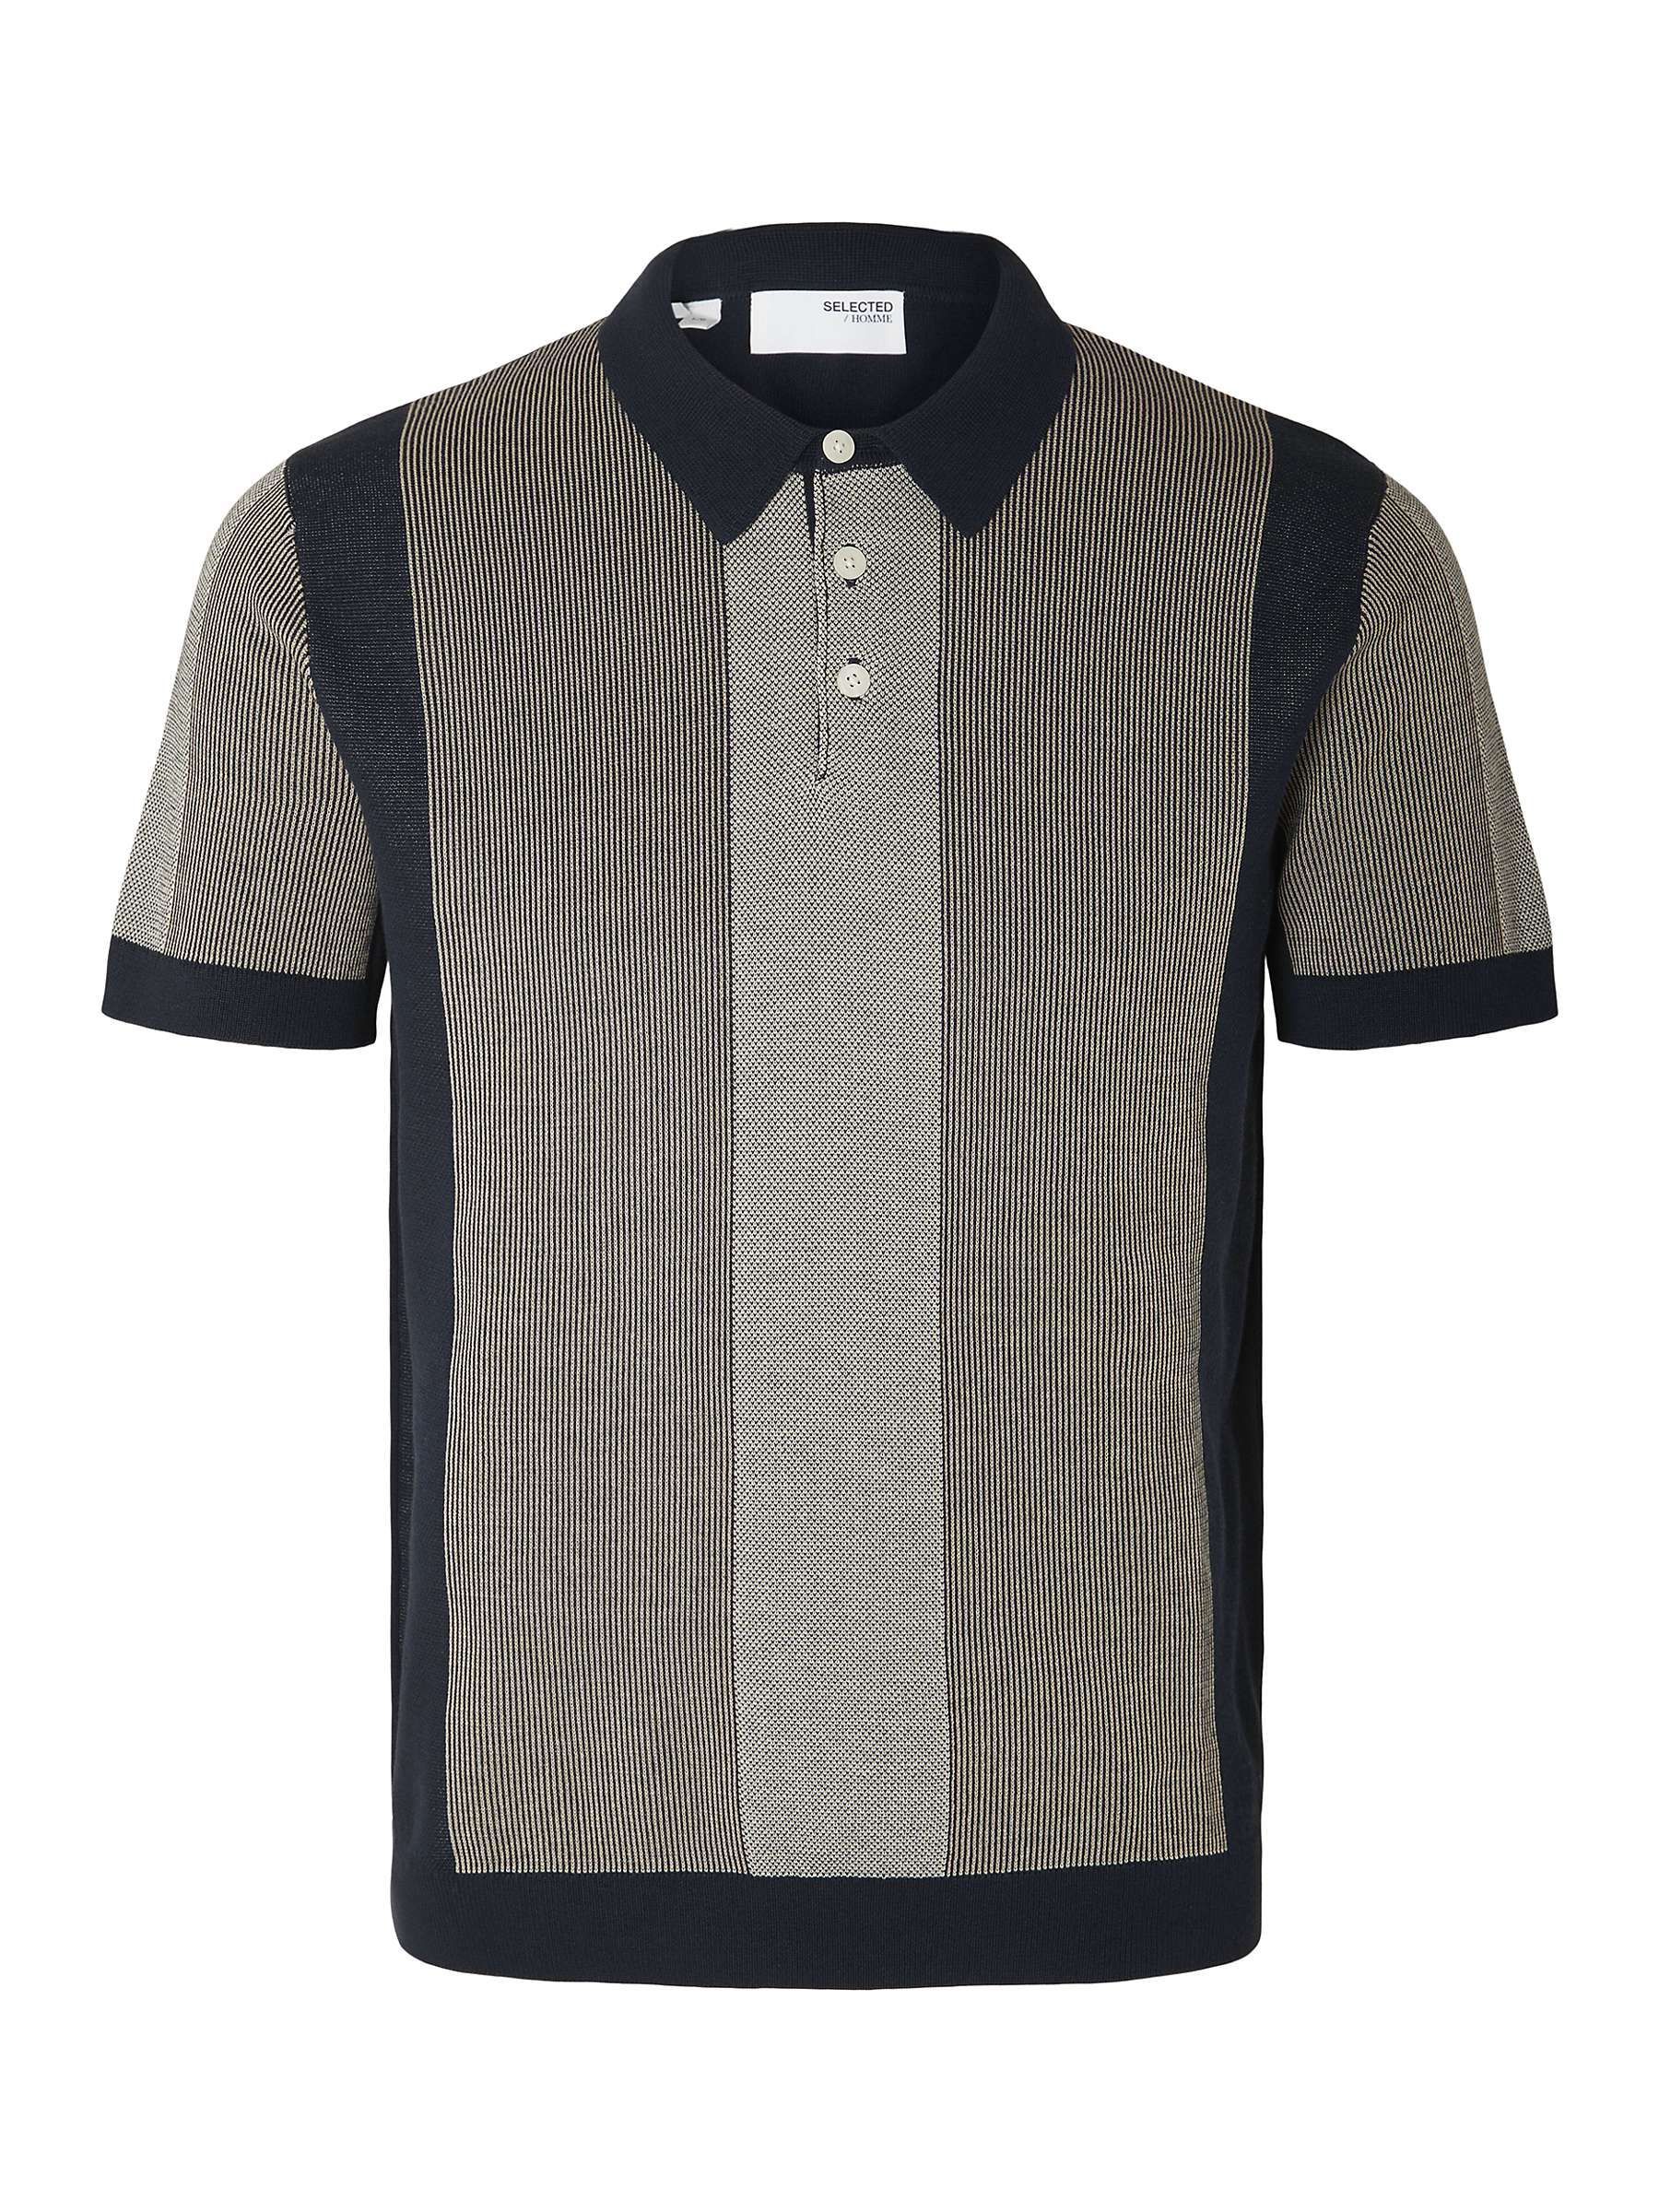 Buy SELECTED HOMME Wide Stripe Polo Shirt, Sky Captain Online at johnlewis.com